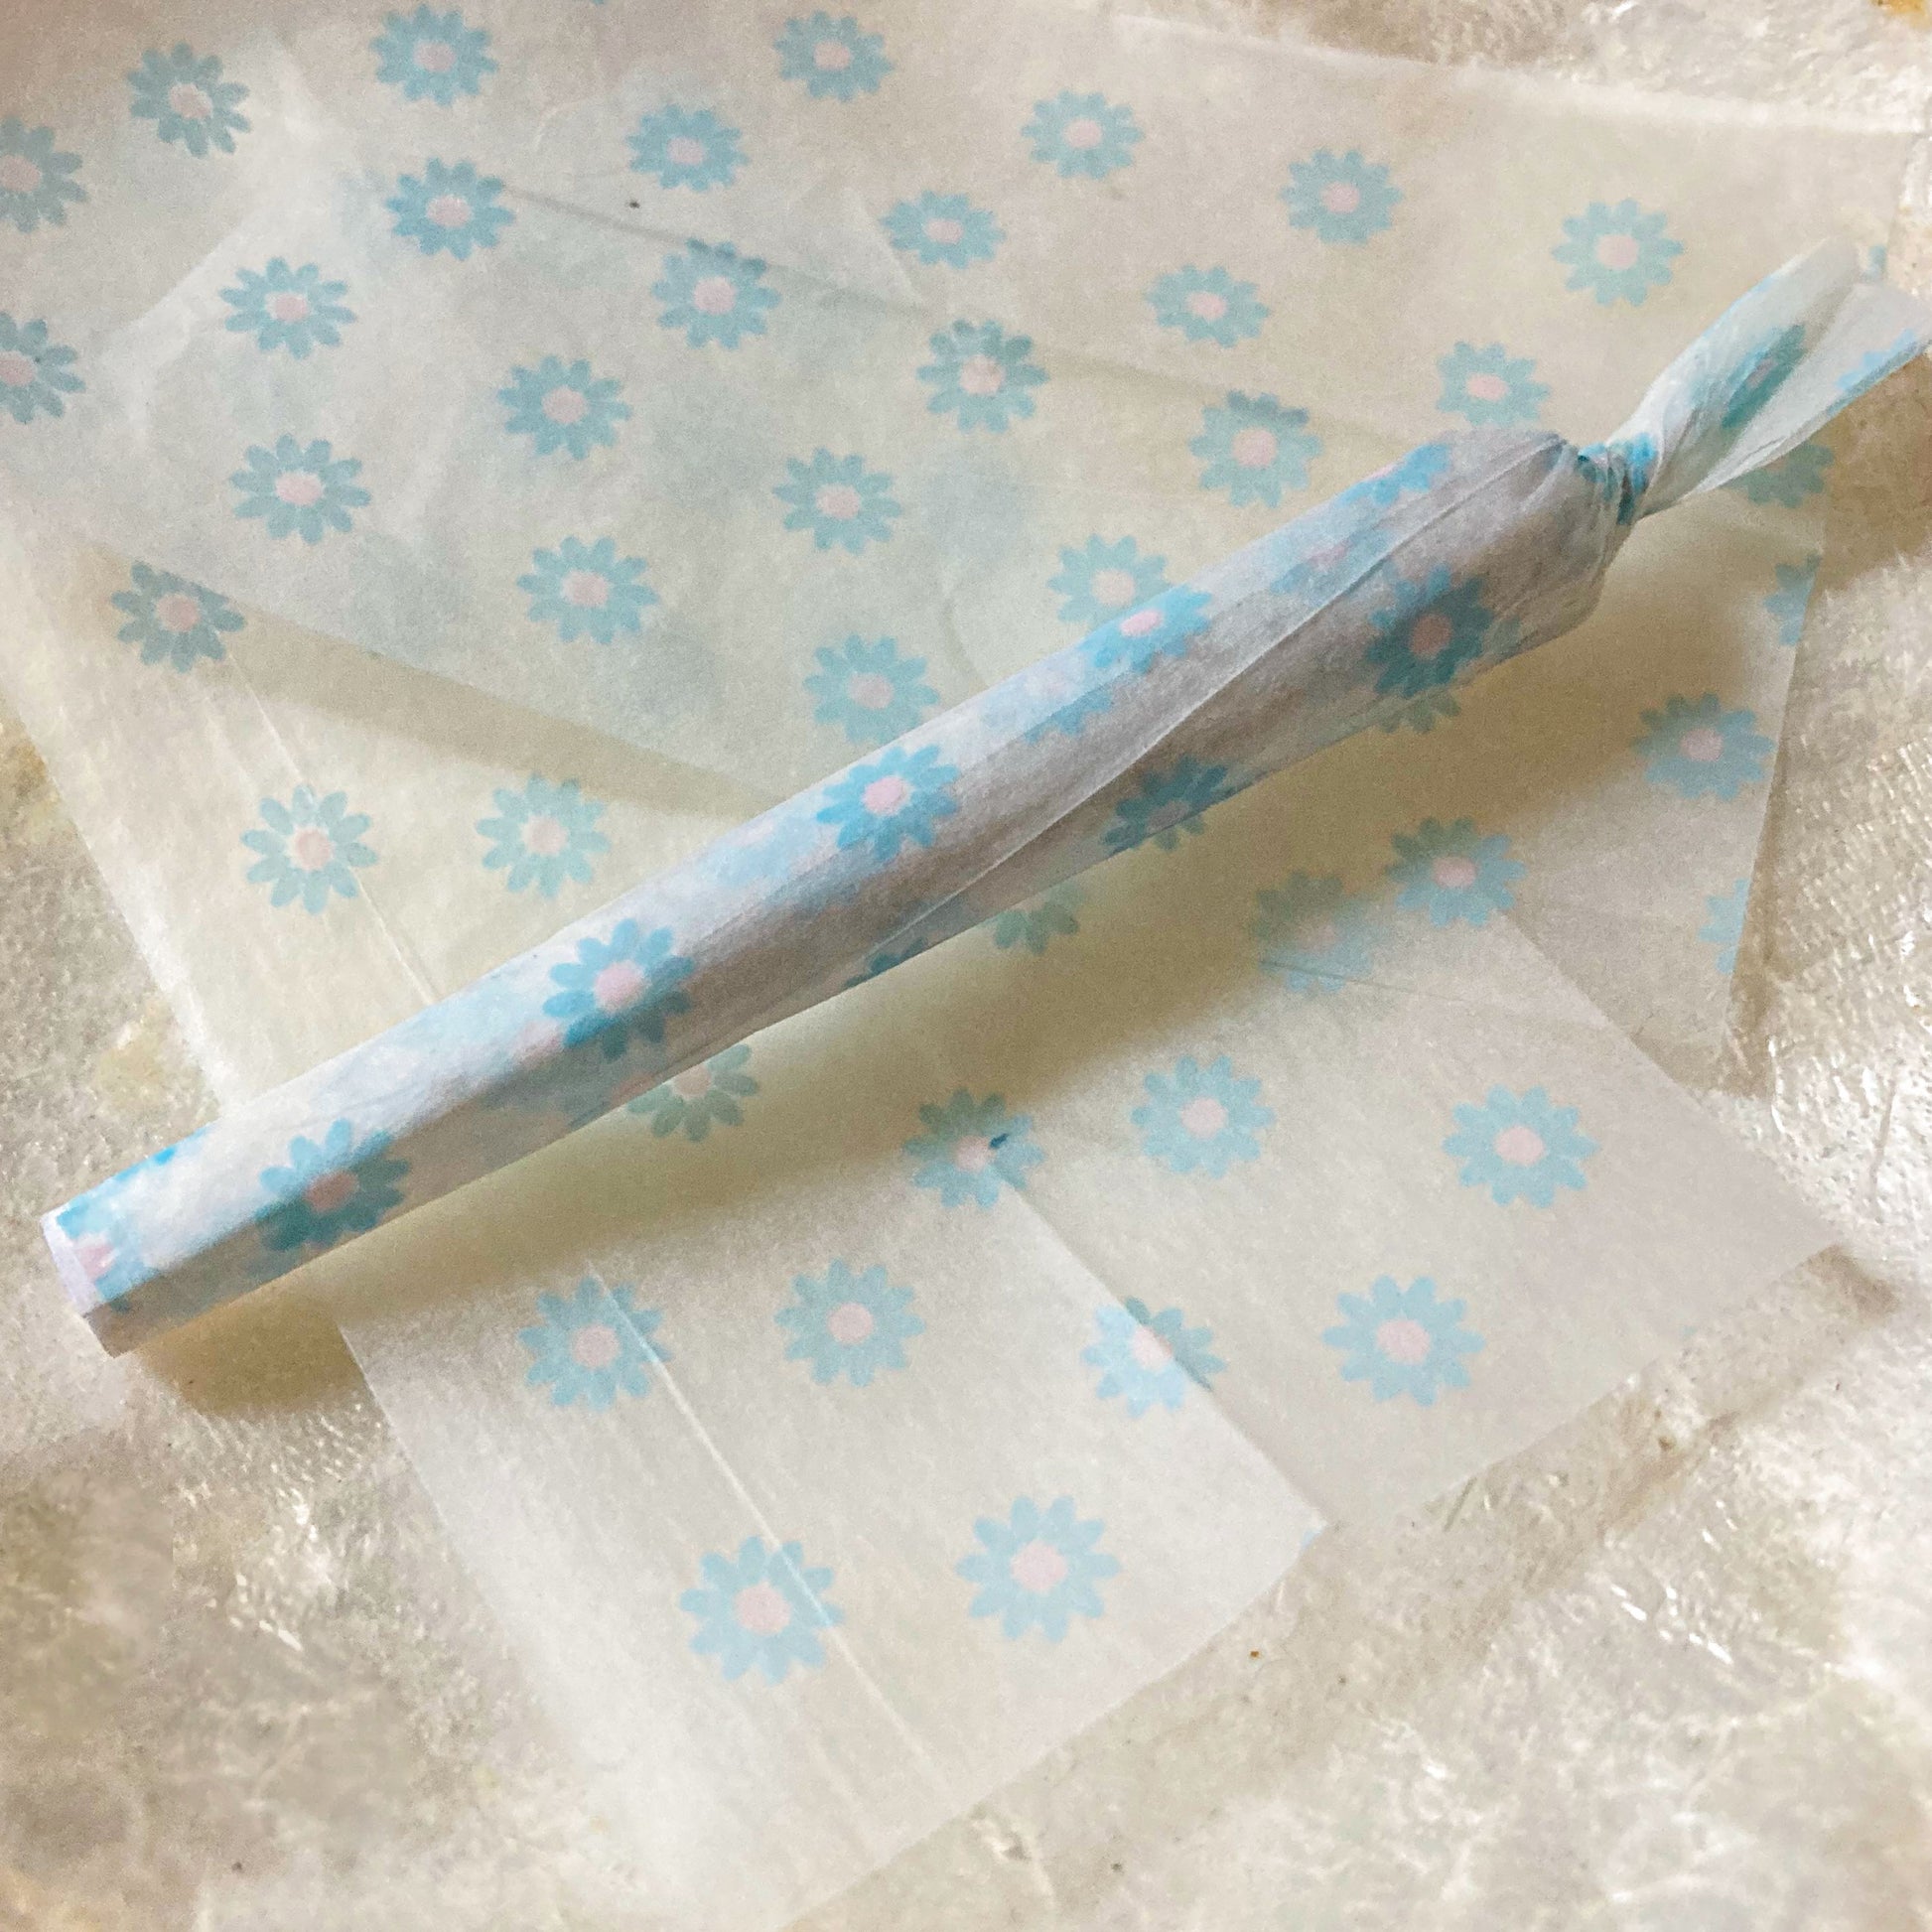 pollyanna papers, set of 10 : blue flower papers. These designer rolling papers are girly, pretty, vegan, cute, cool, standard size, high quality, even burn, natural dyes, best tasting, slow burn.